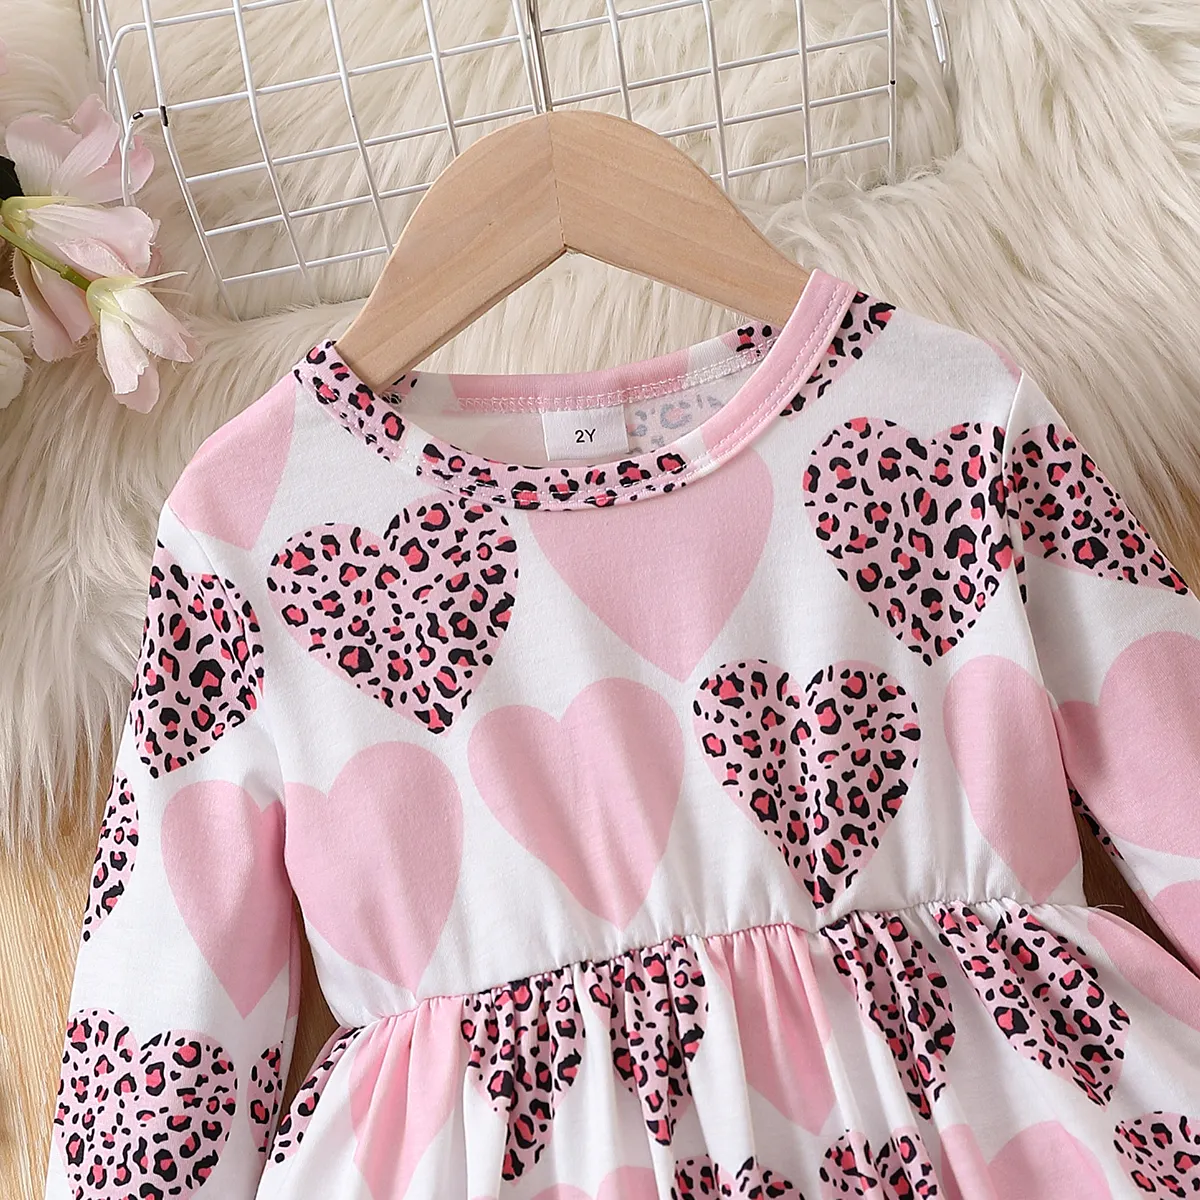 Toddler Girl Heart-shaped Dress with Long Sleeves Color block big image 1